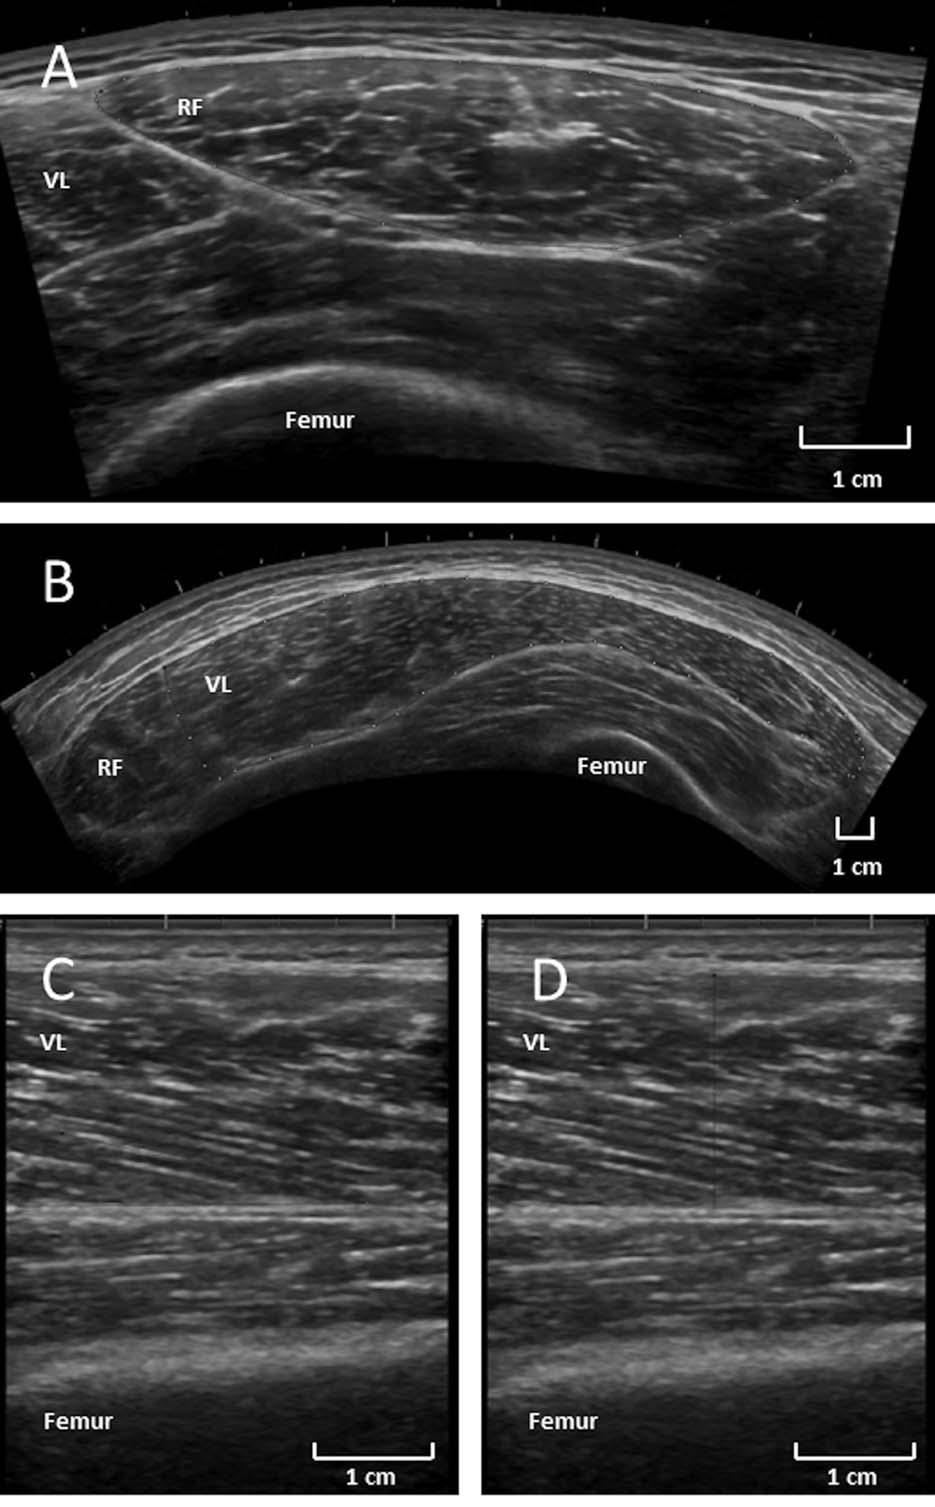 FIGURE 2. Example of ultrasound measurements of rectus femoris (RF) cross-sectional area (A), vastus lateralis (VL) cross-sectional area (B), VL pennation angle (C), and VL muscle thickness (D).